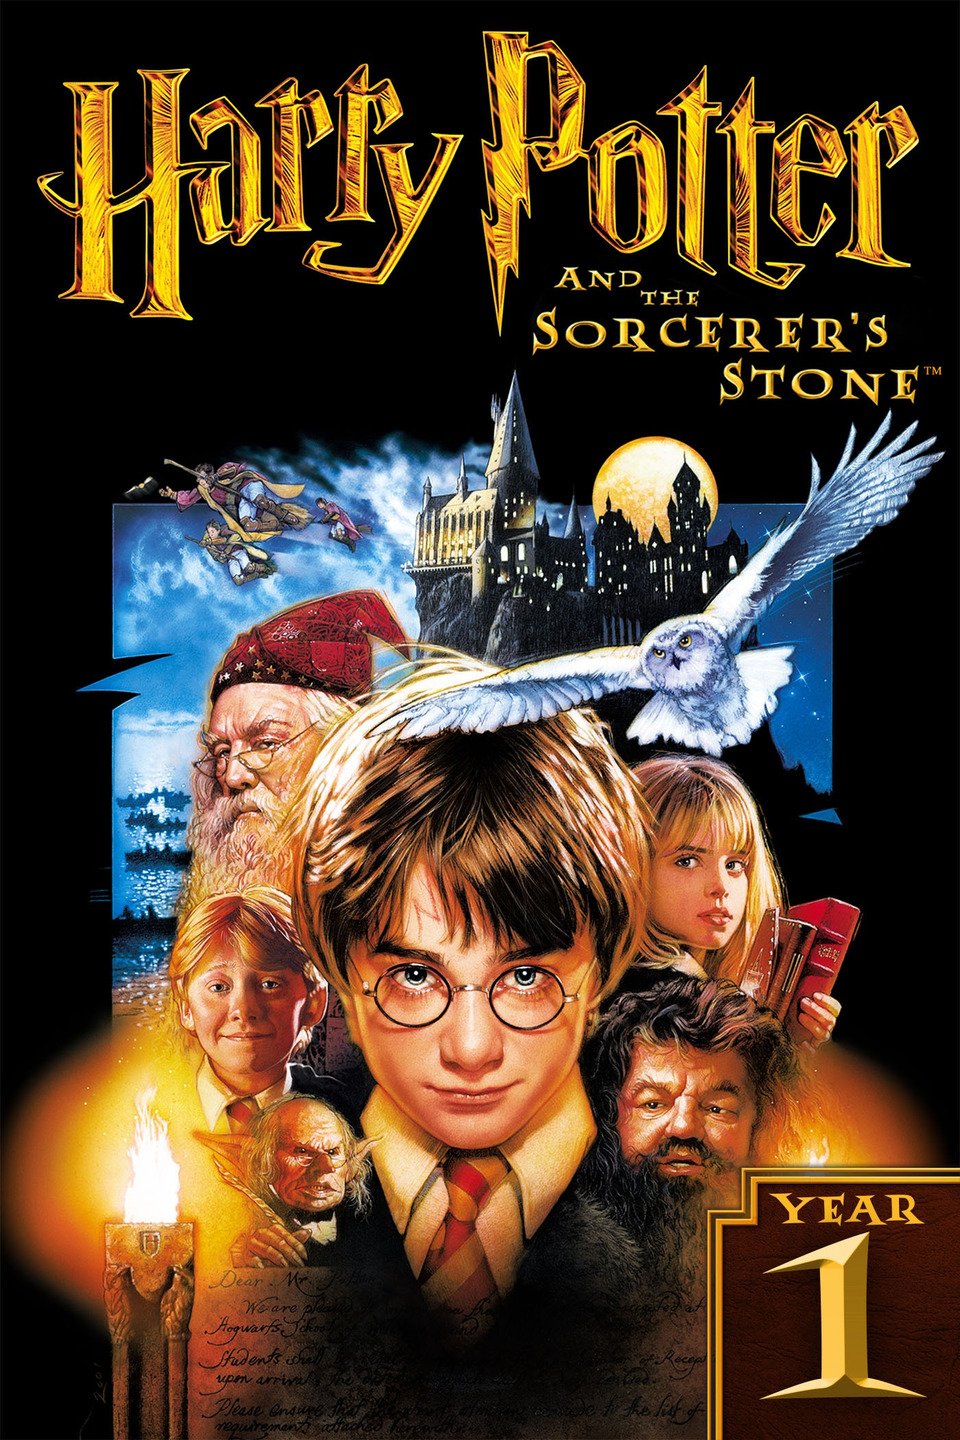 Movie poster for Harry Potter and the Sorcerer's Stone 